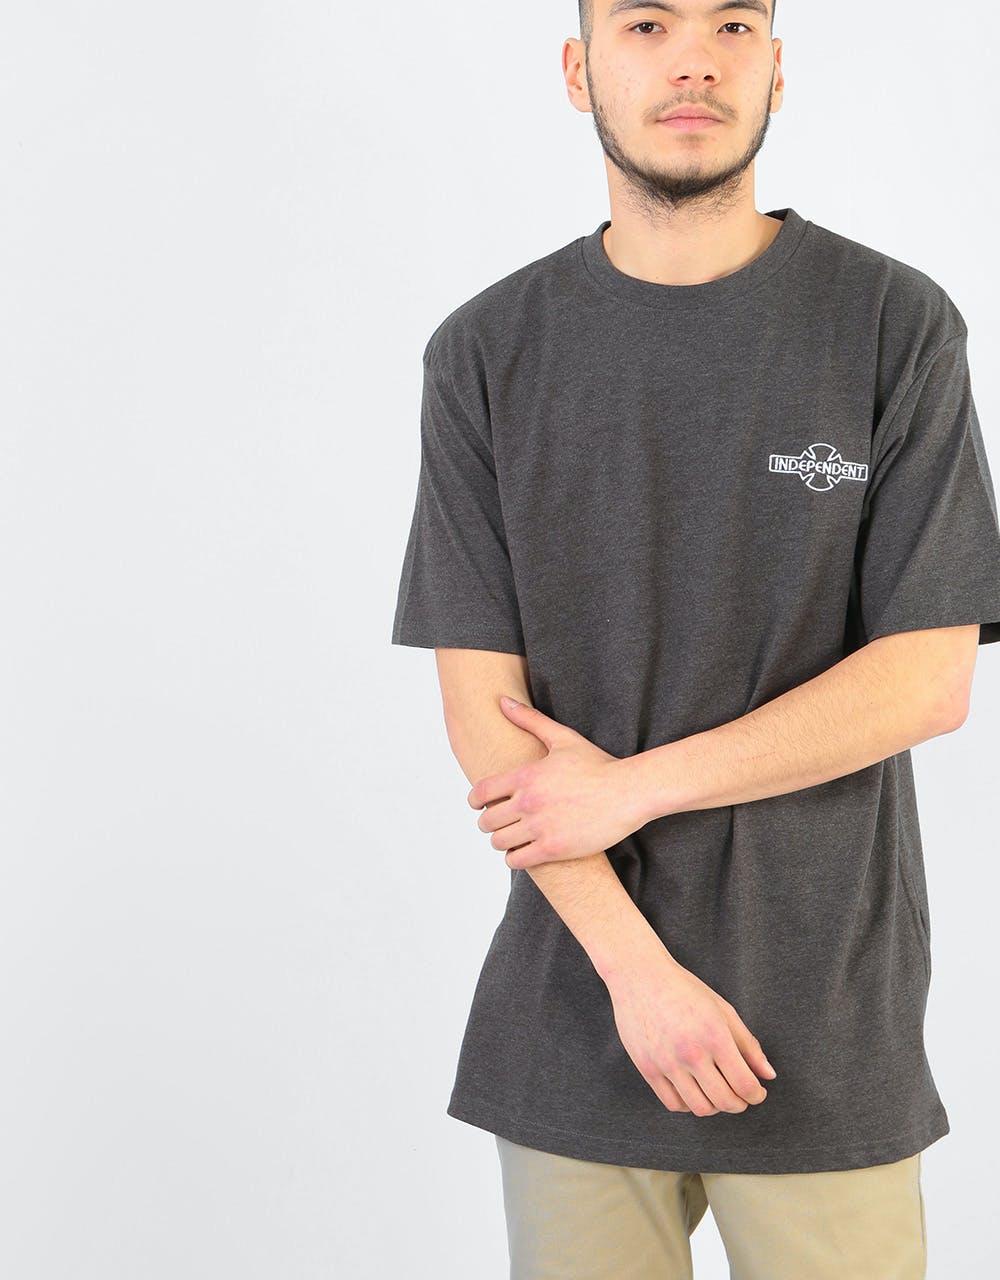 Independent O.G.B.C. Embroidery T-Shirt - Charcoal Heather